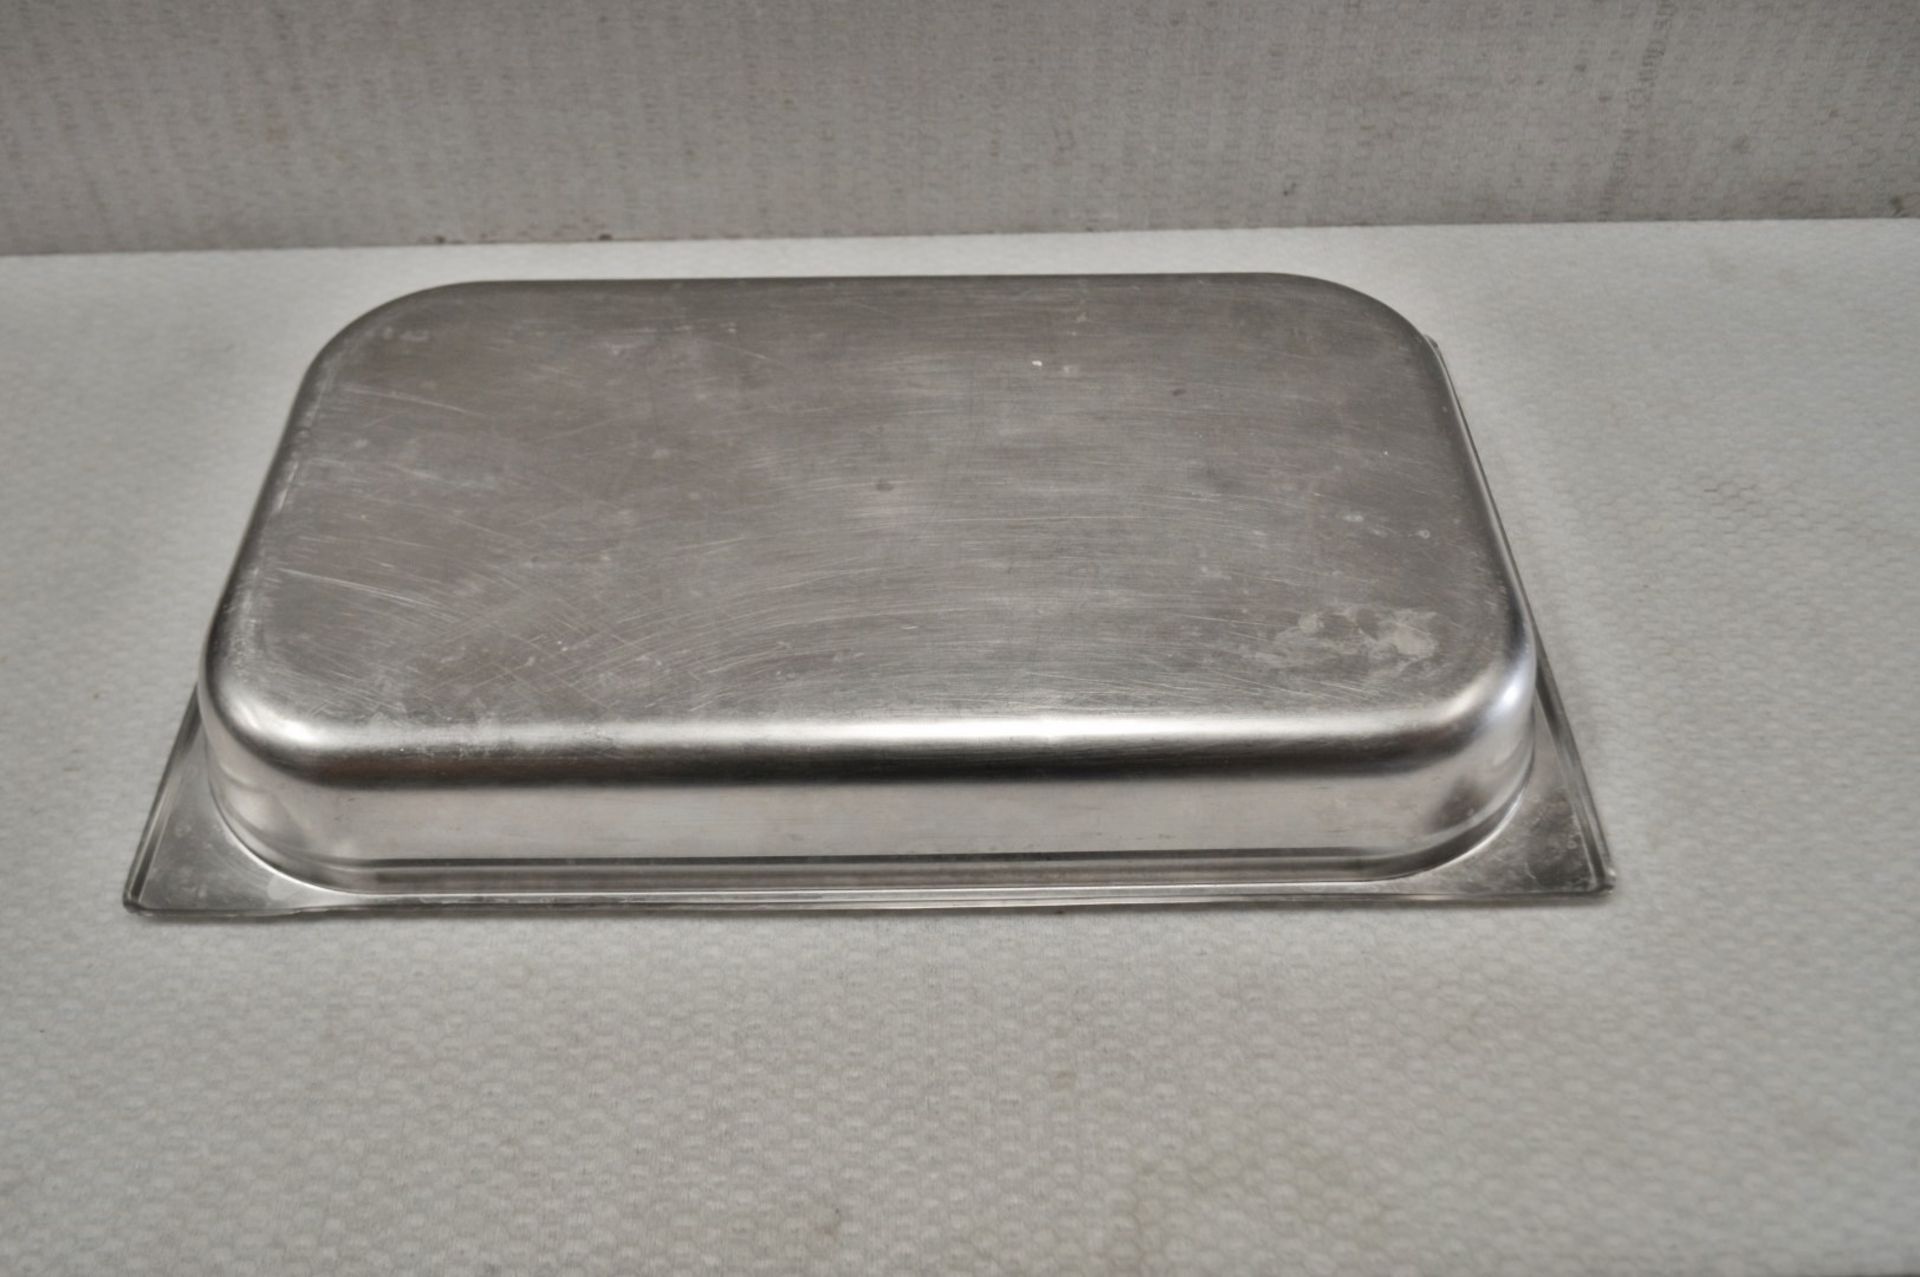 12 x Stainless Steel Gastronorm Trays - Dimensions: L53 x W32 cm - Recently Removed From A - Image 2 of 2